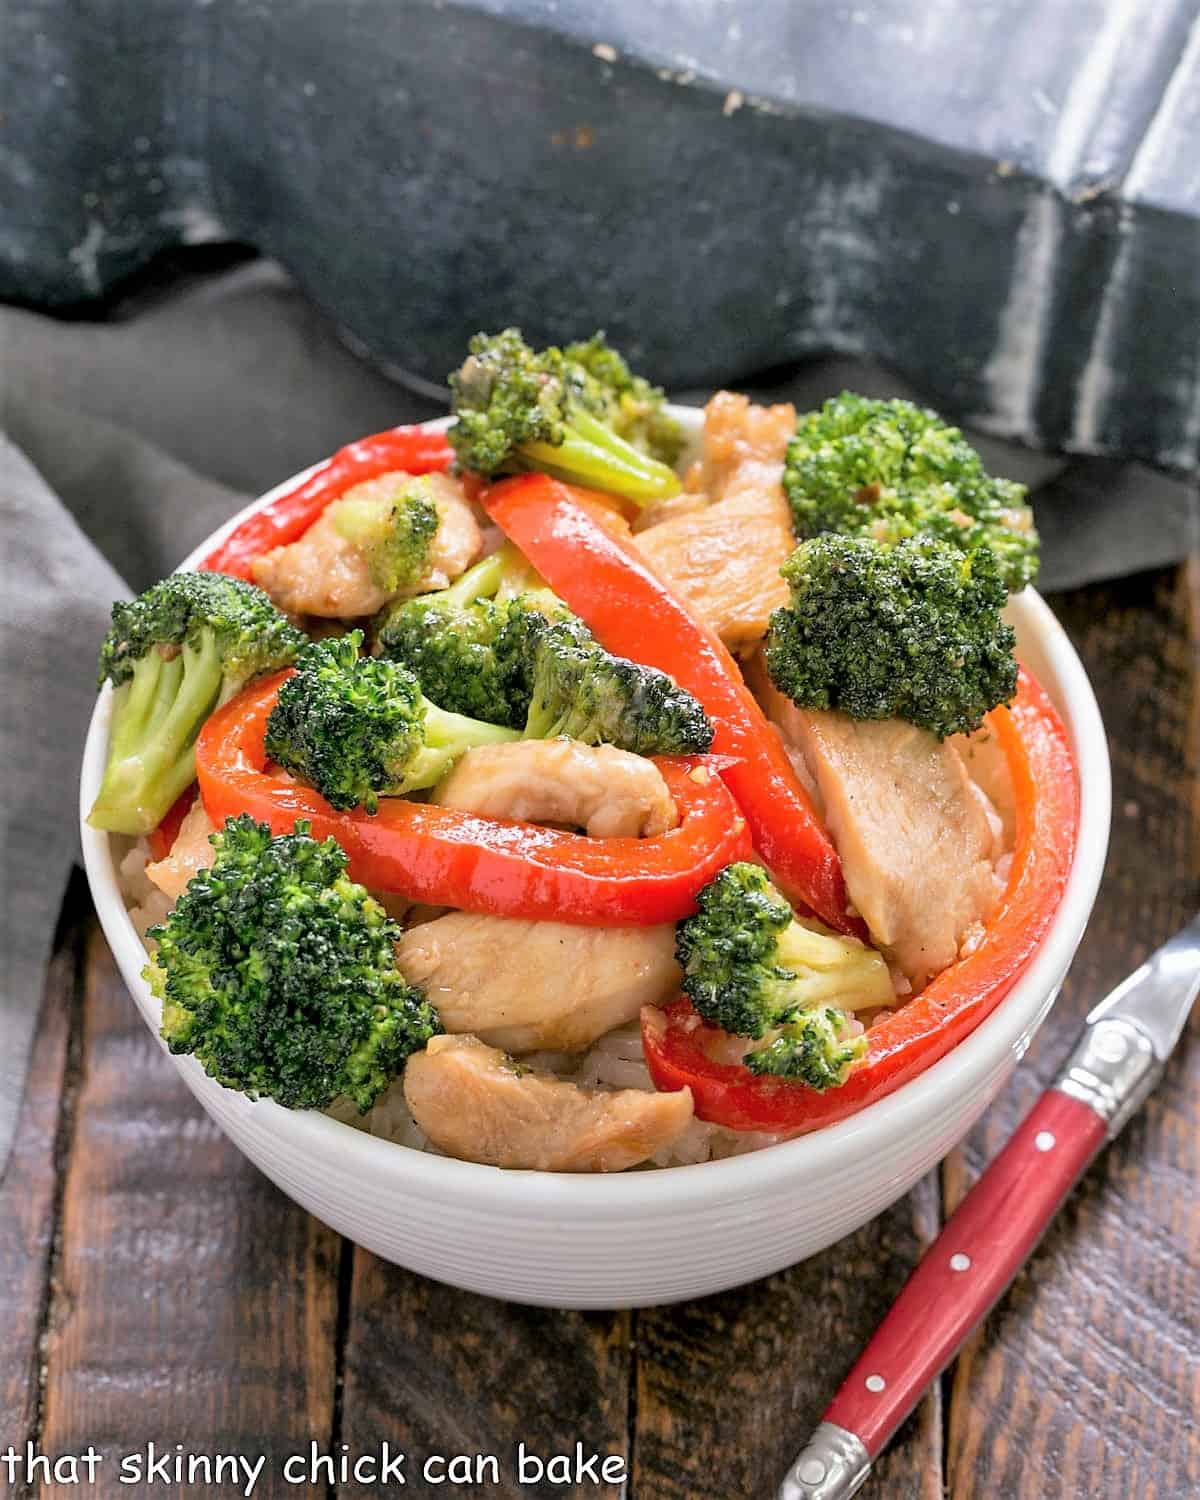 Easy Chicken Stir Fry viewed from above with a red handled fork.